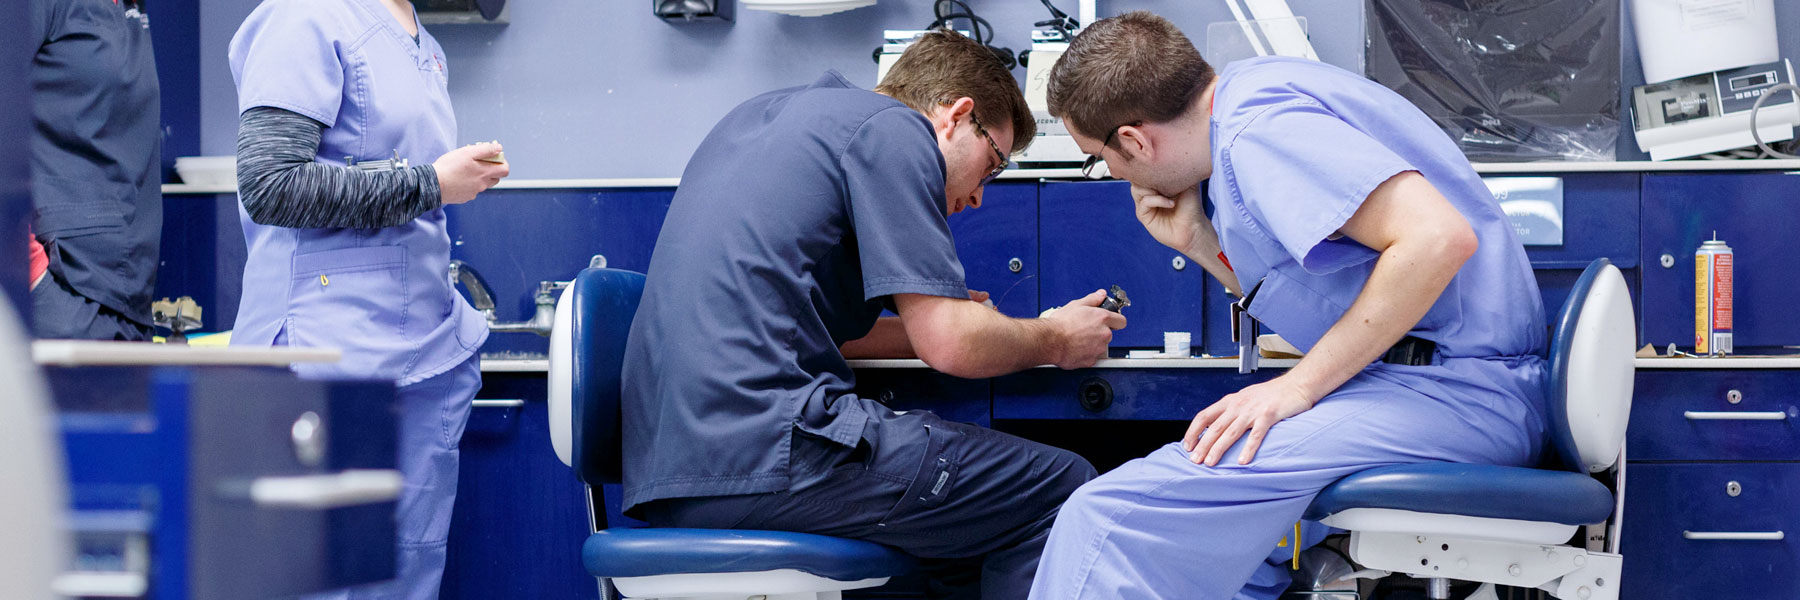 Two male dentistry students in scrubs work with dental tools at a research lab station.